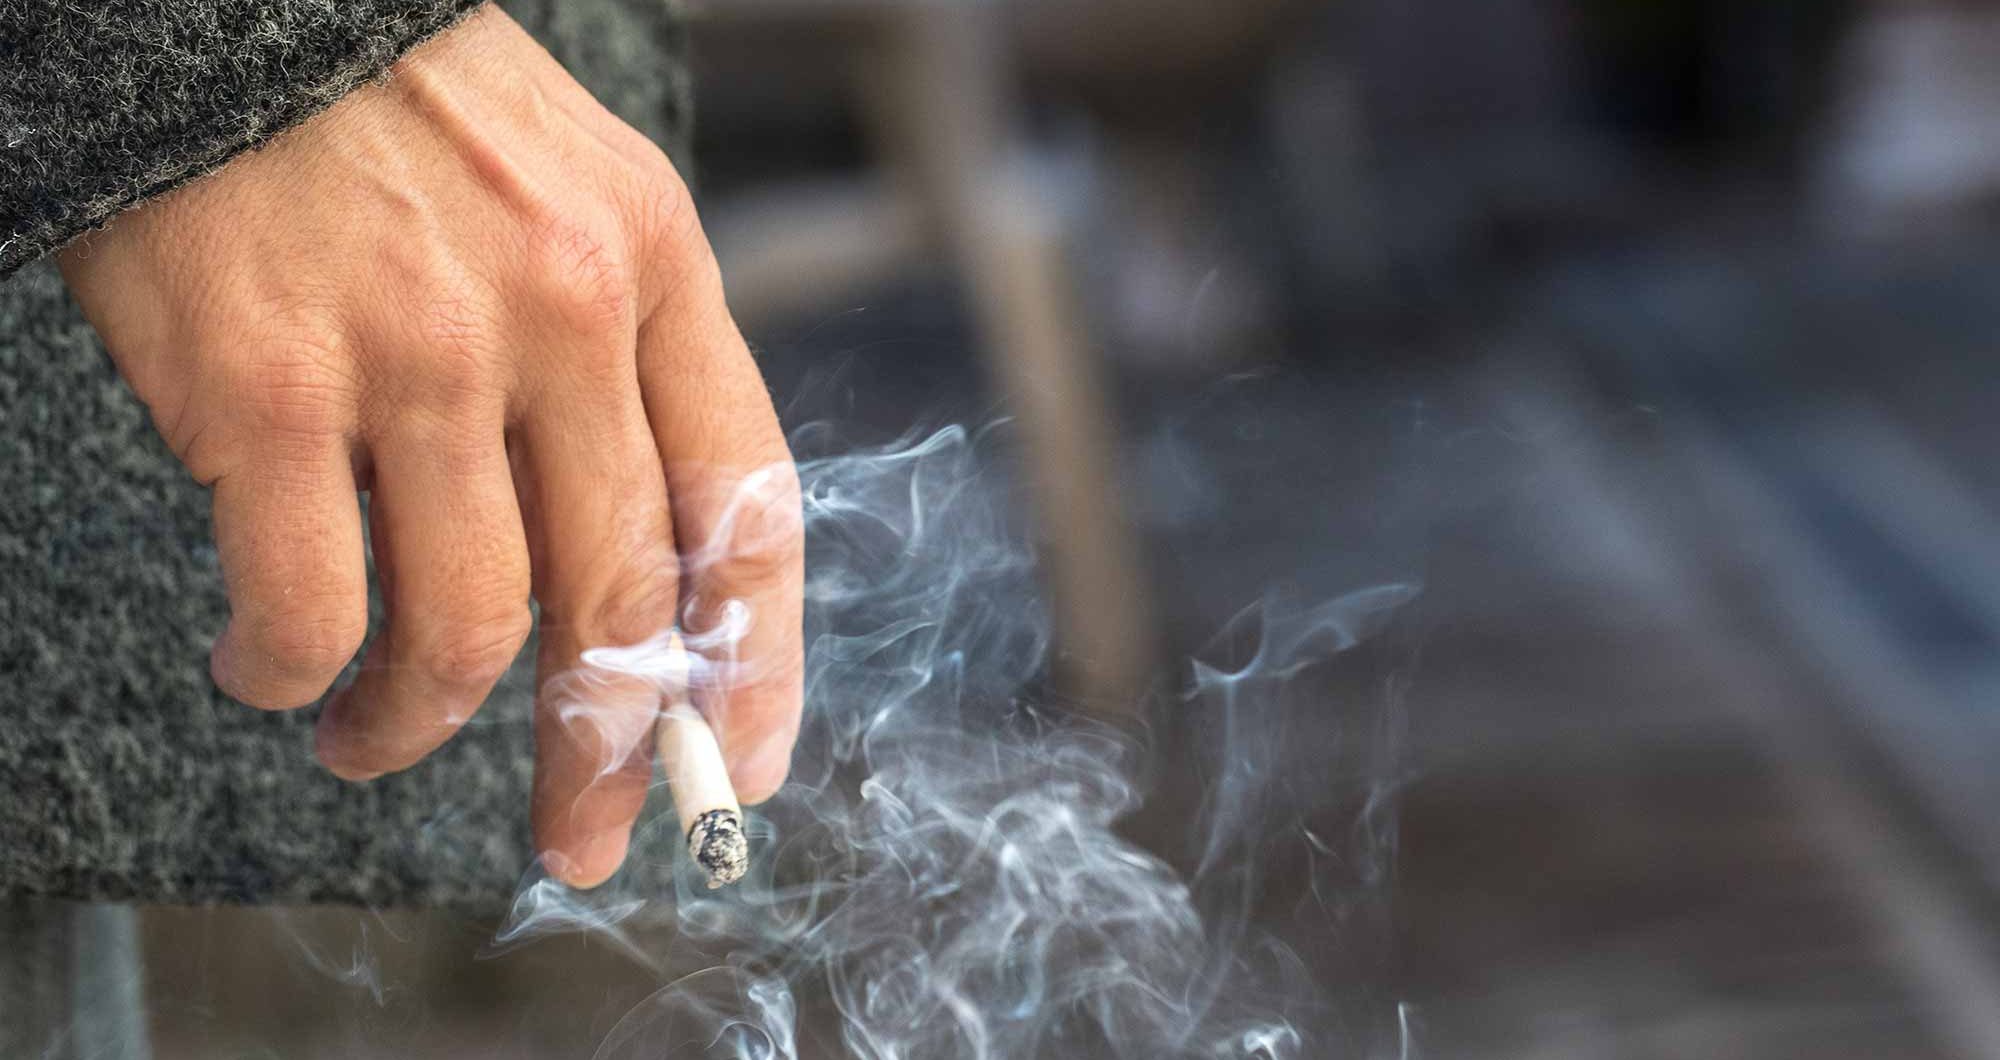 A study found evidence to show loneliness makes it harder to quit smoking